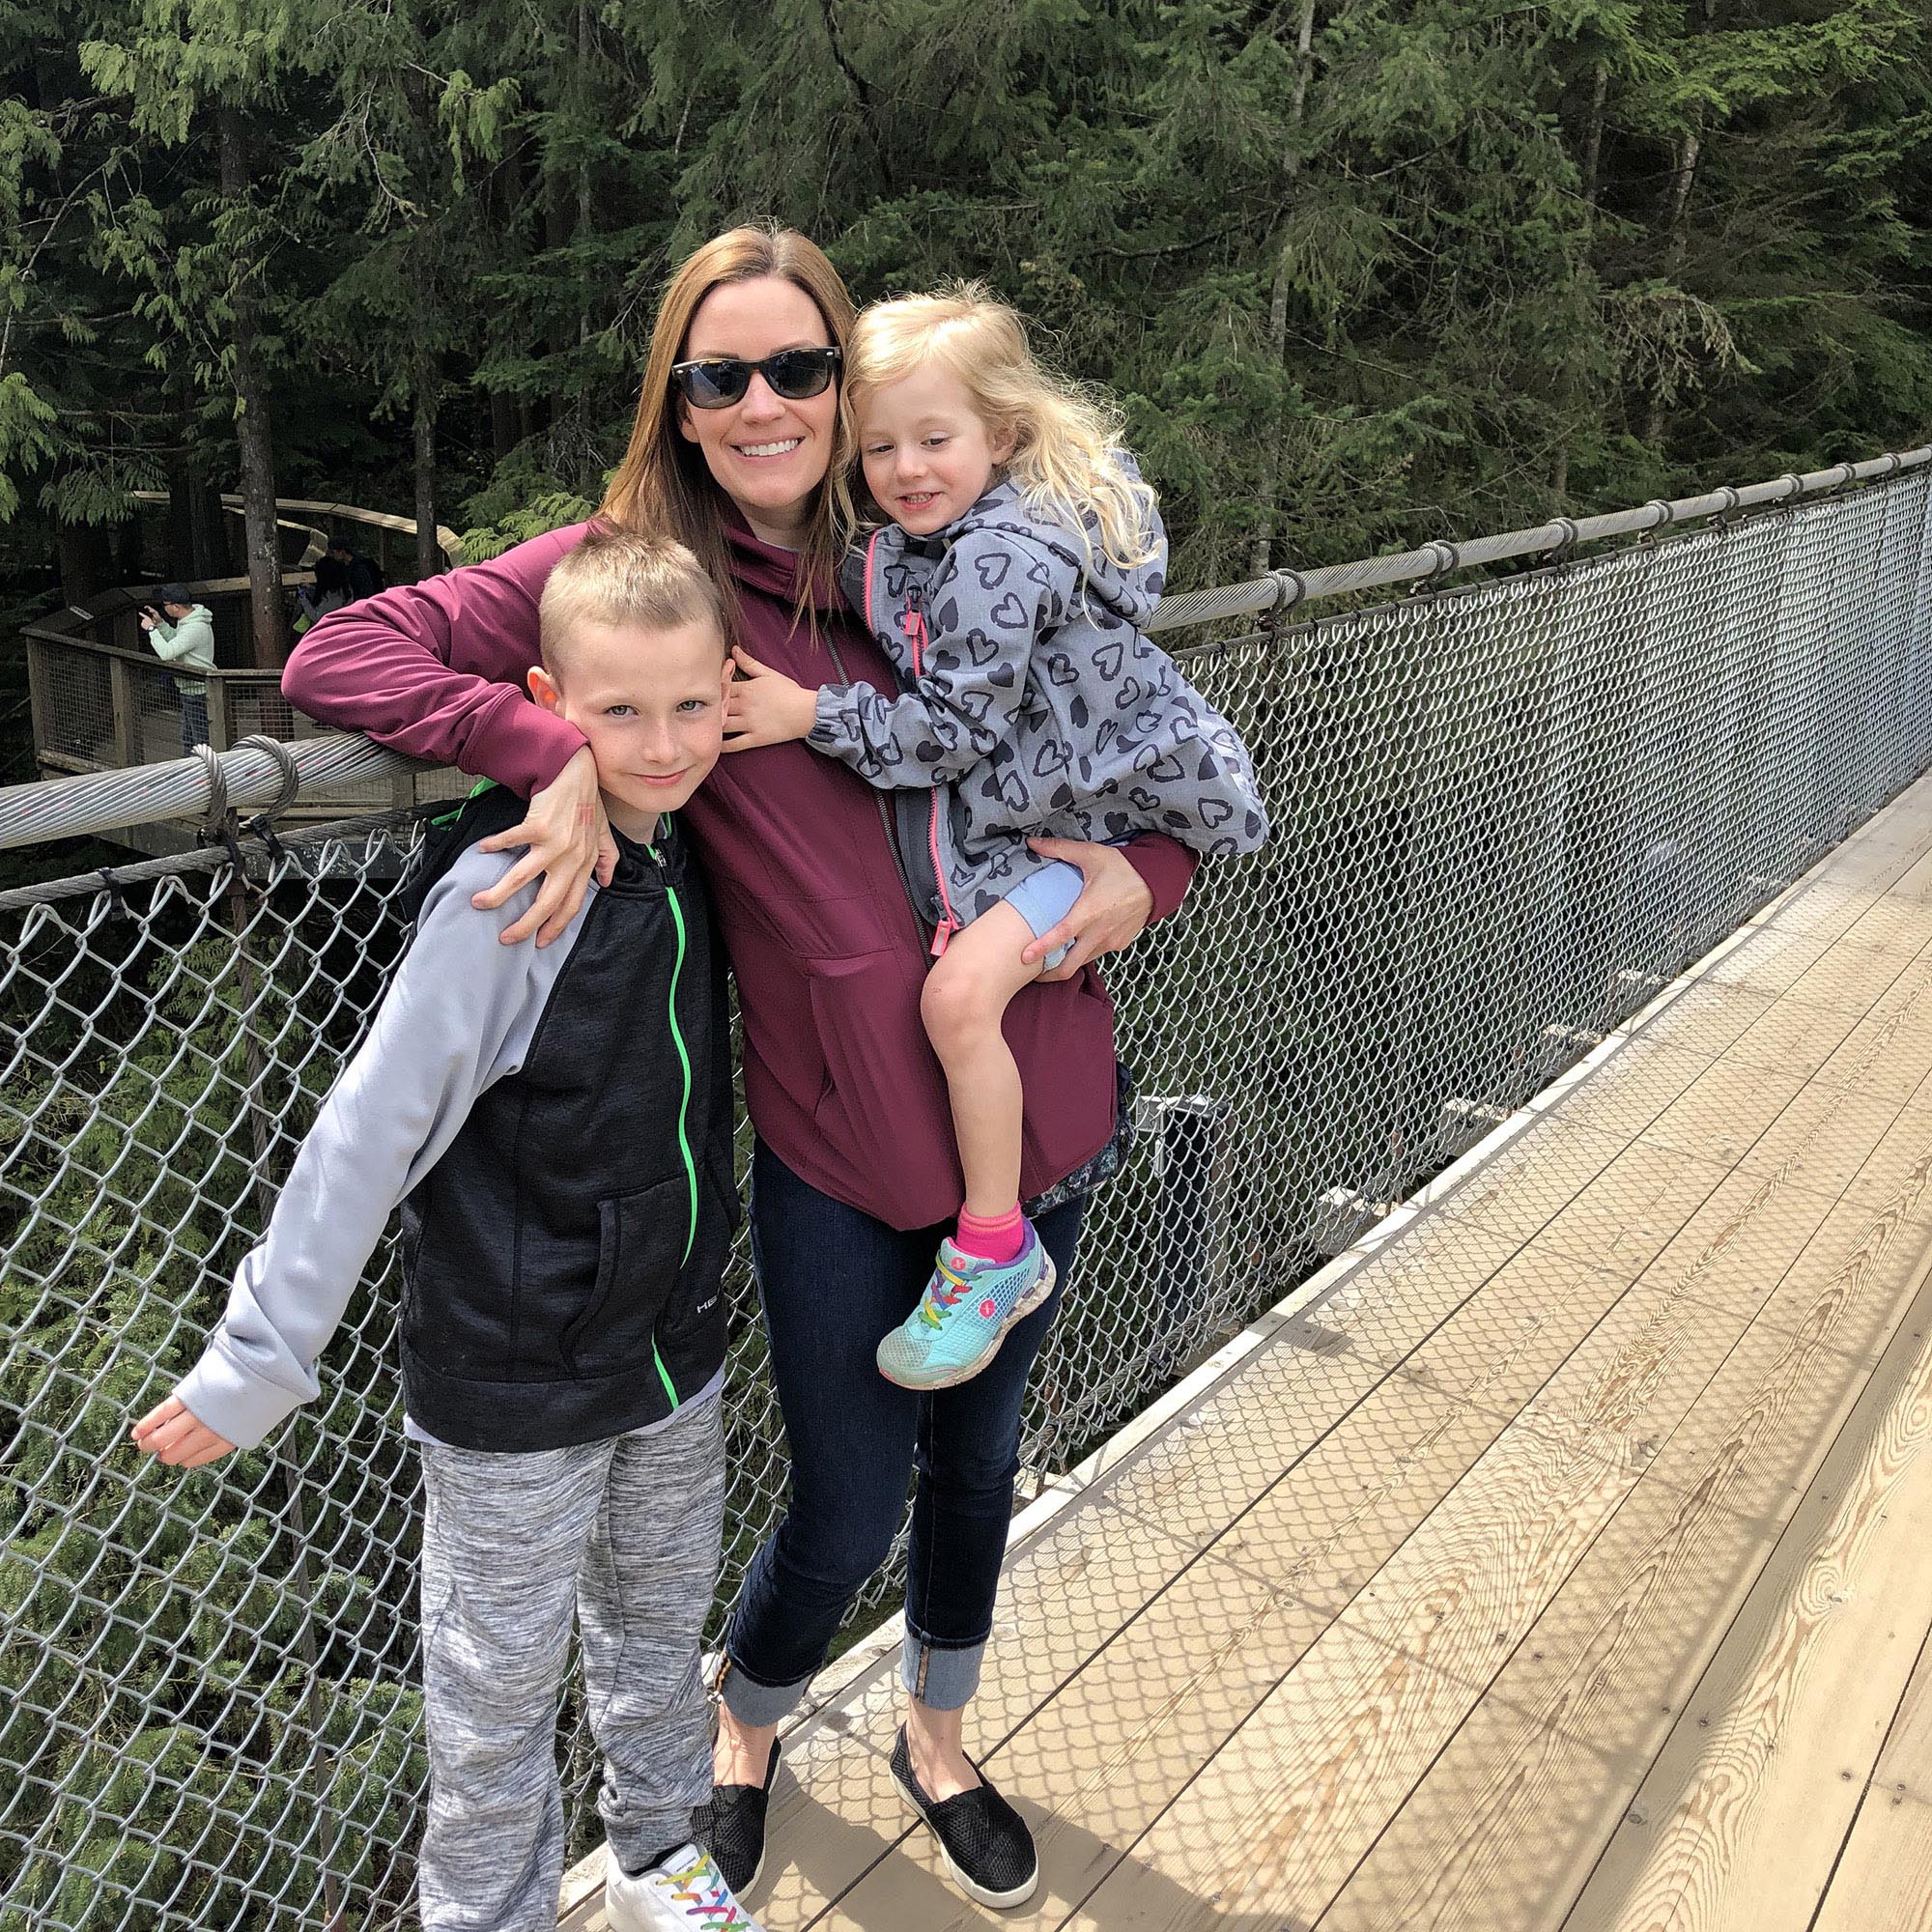 Sarah stands on a bridge while holding her niece. Her nephew is standing close beside them.